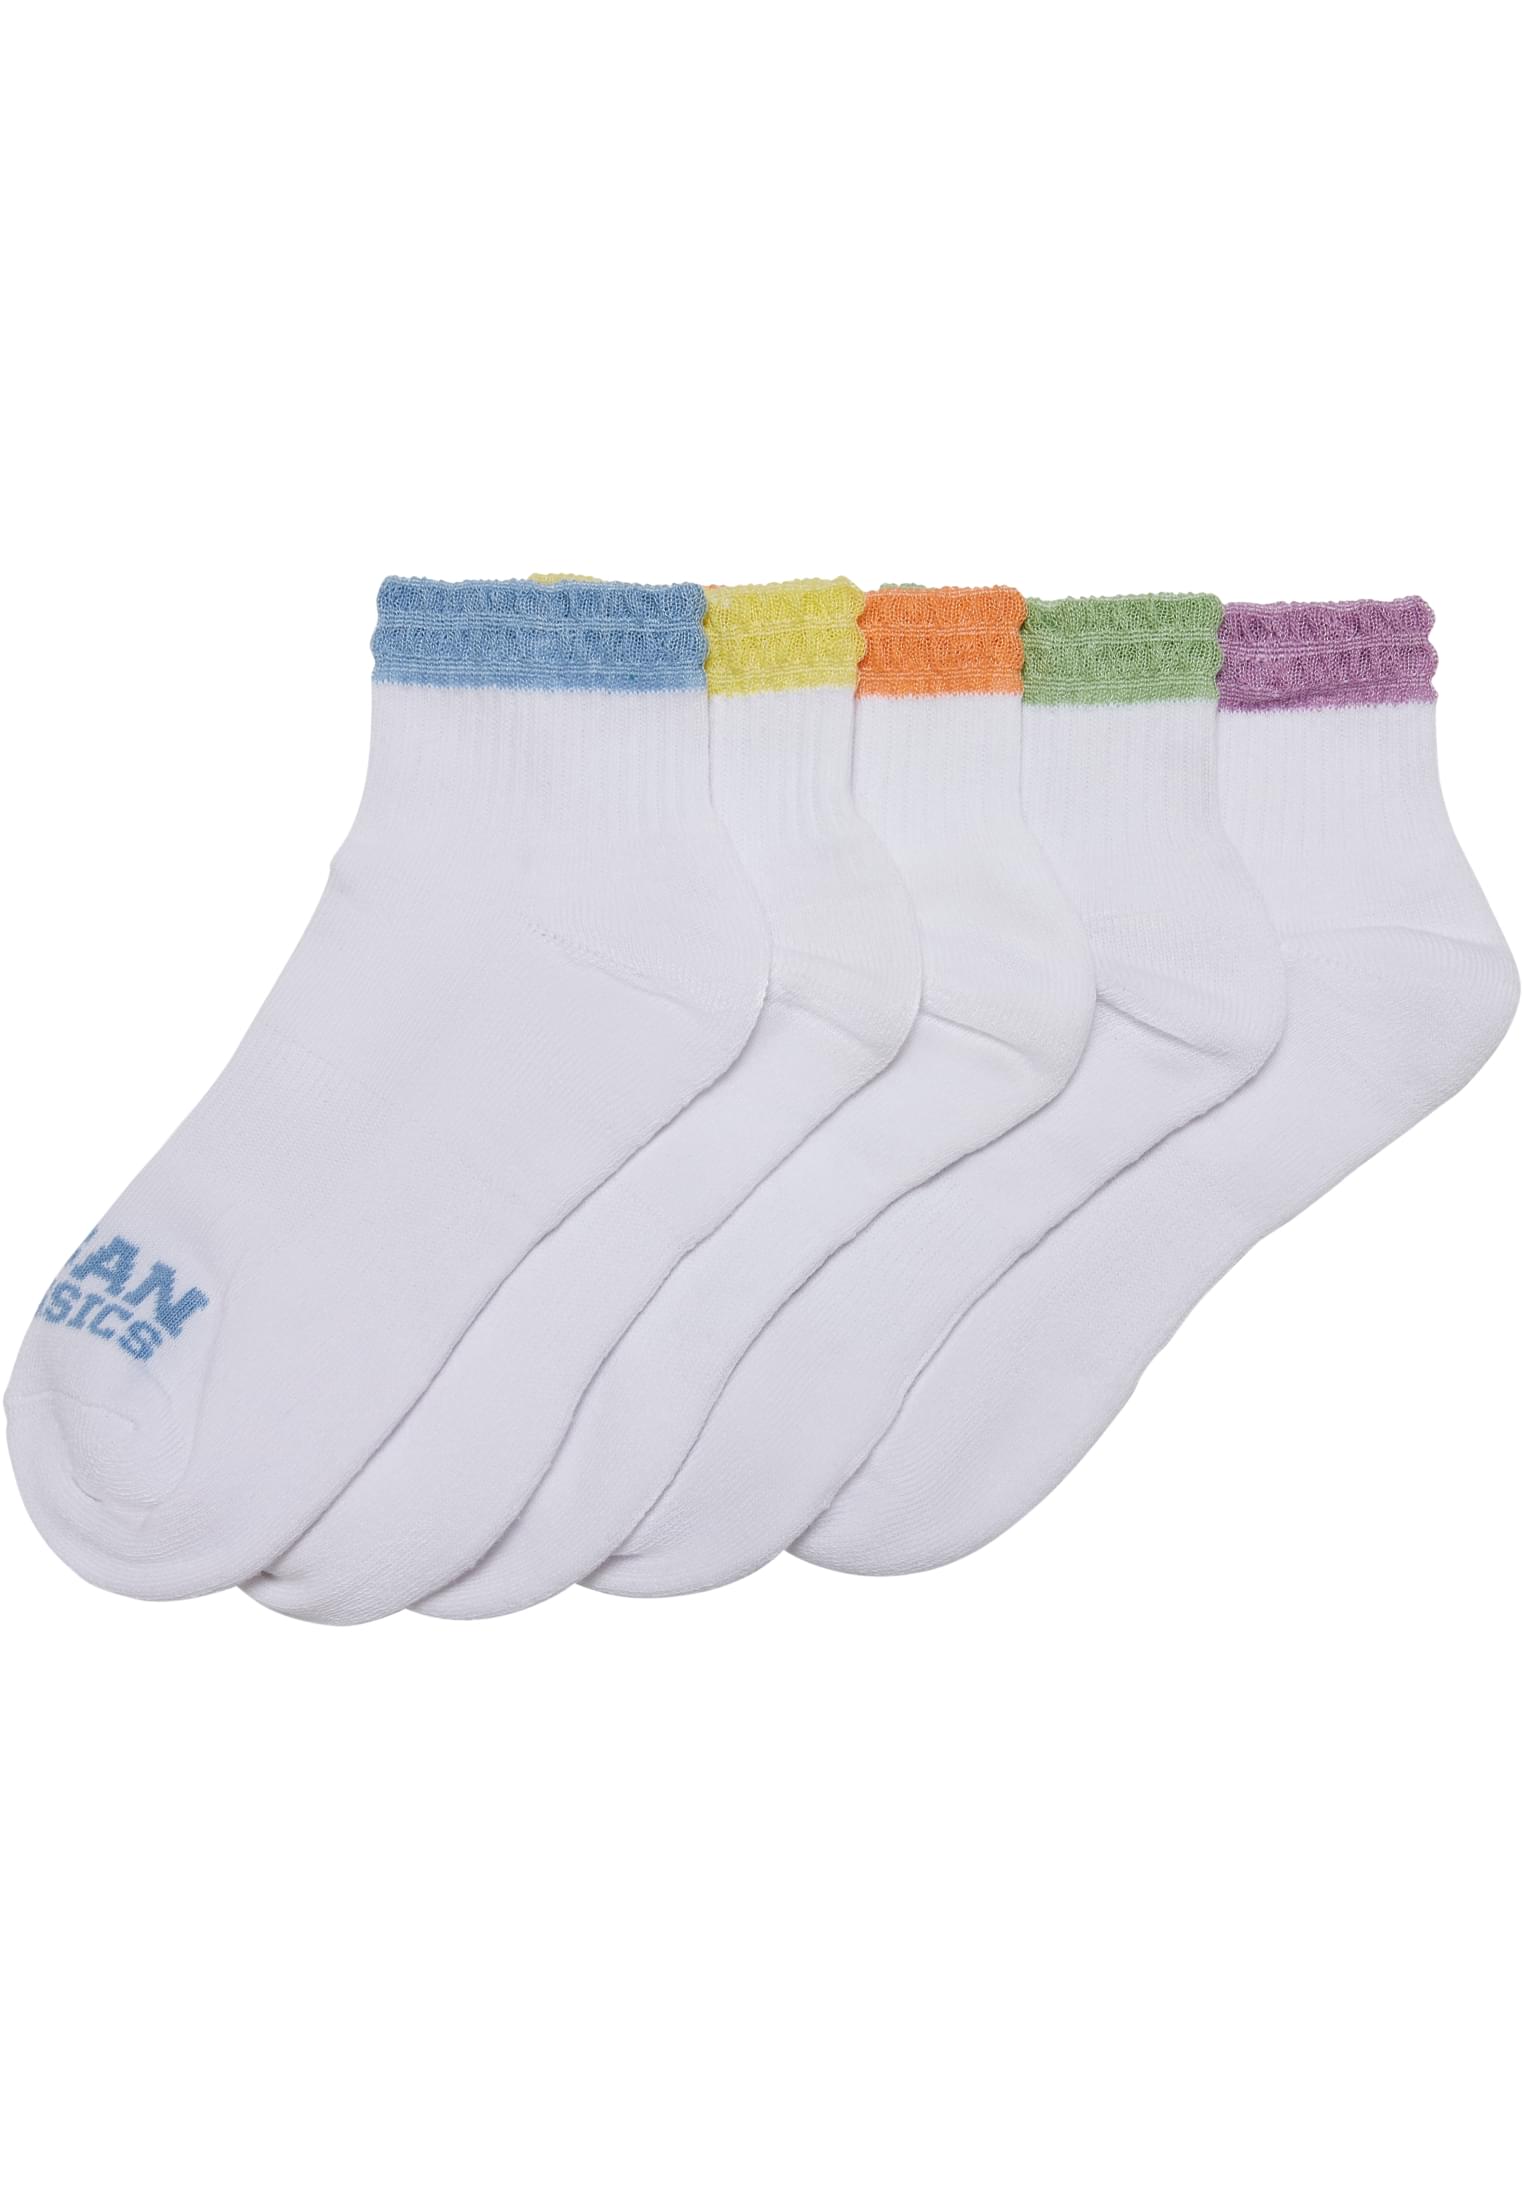 Colorful Lace Cuff Socks 5-Pack Summer Color